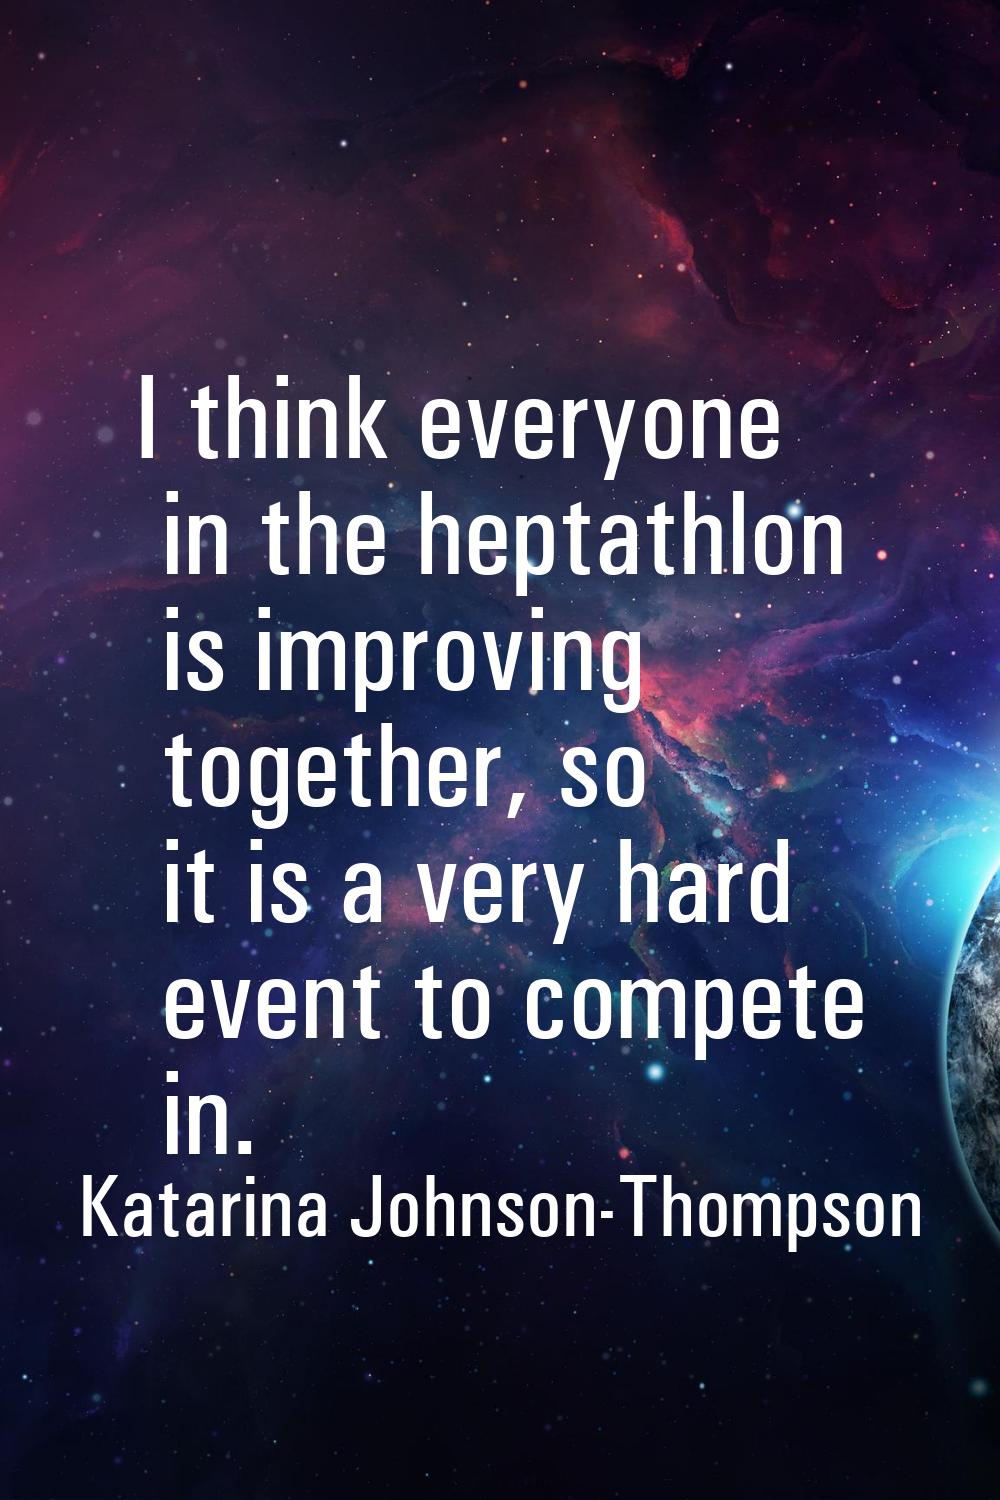 I think everyone in the heptathlon is improving together, so it is a very hard event to compete in.